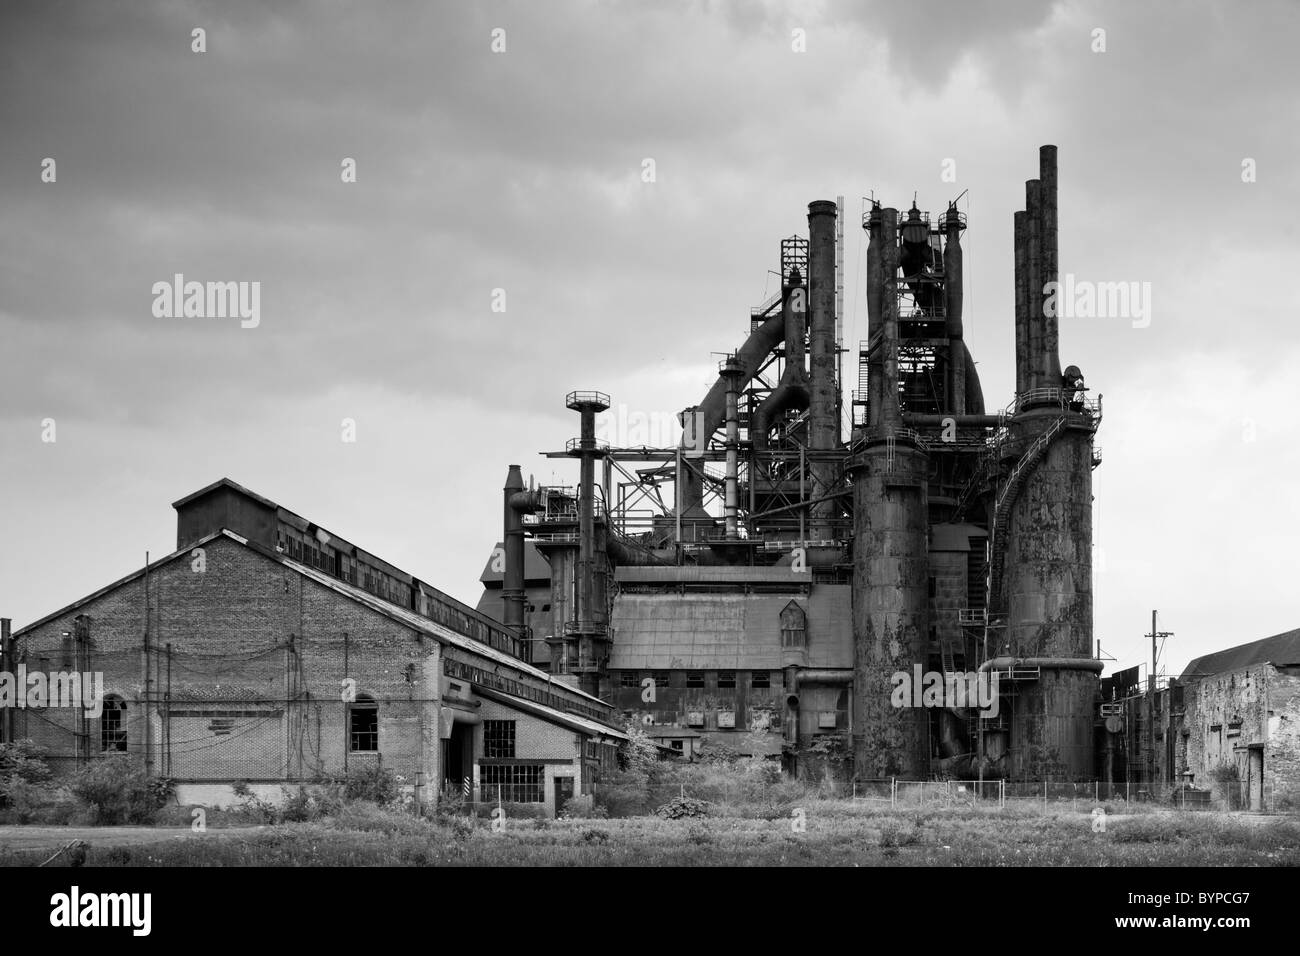 USA, Pennsylvania, Bethlehem, Abandoned and rusting remains of blast furnaces at Bethlehem Steel Plant that was closed in 1995 Stock Photo